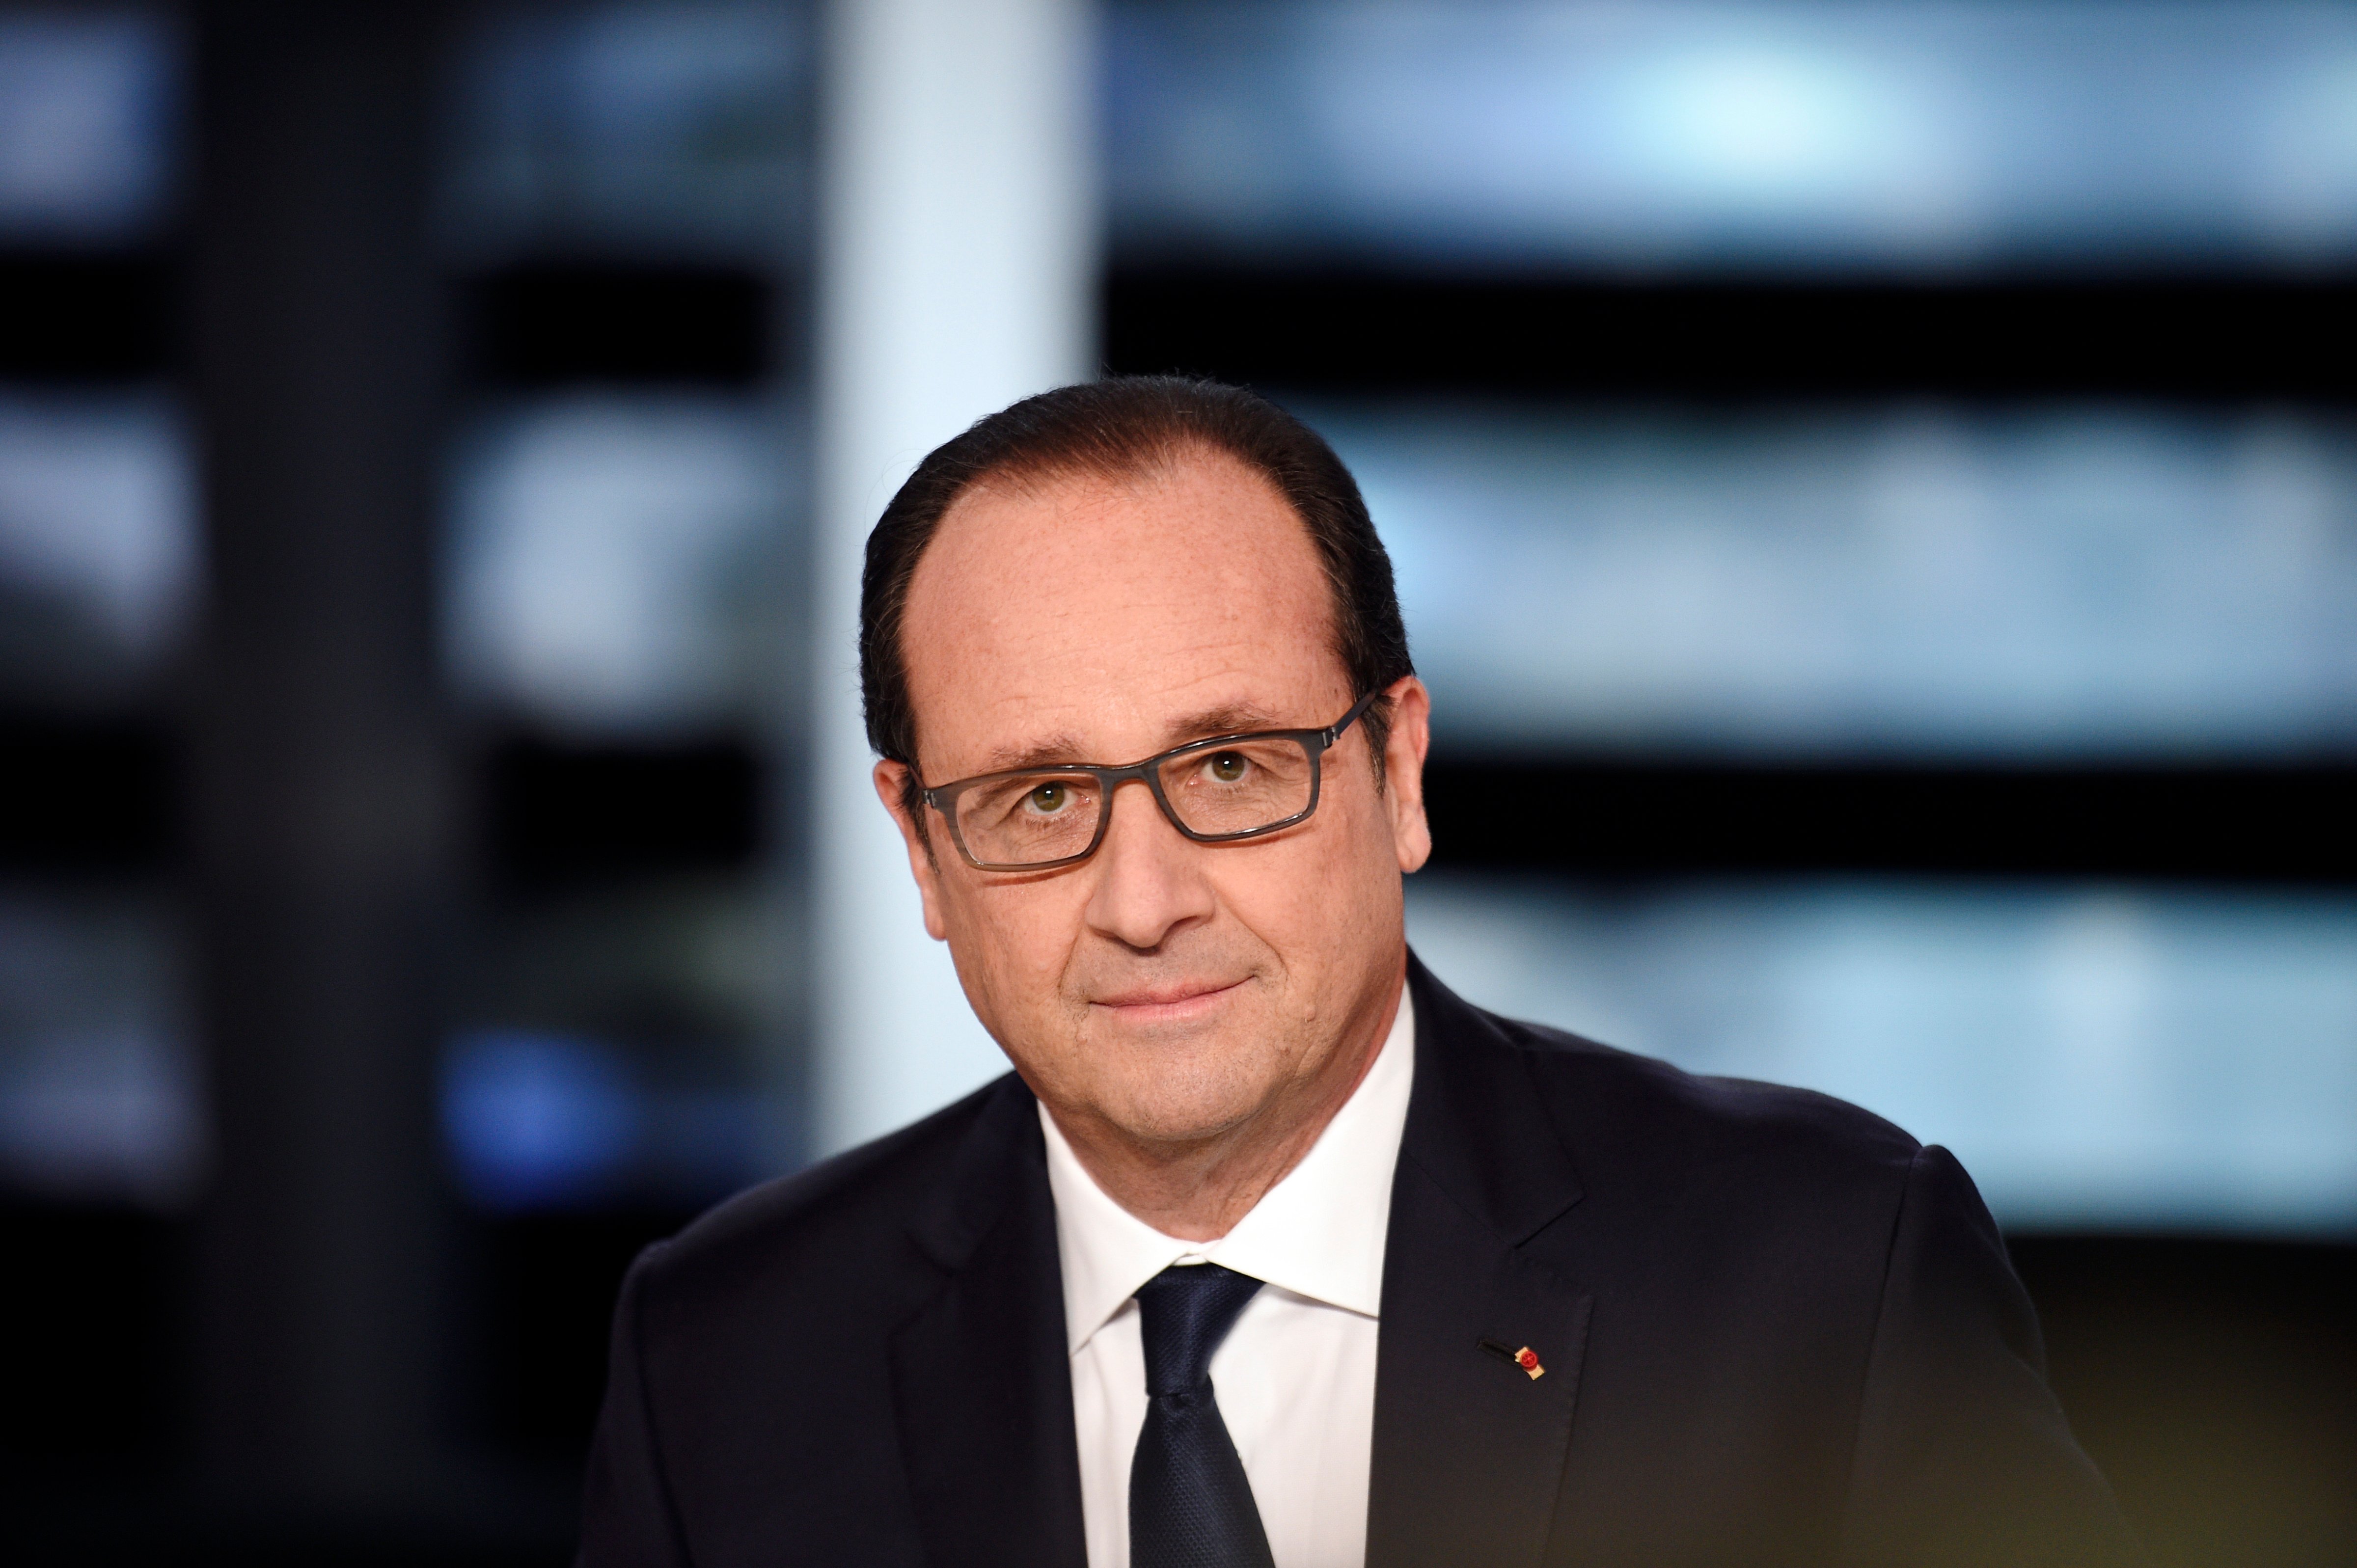 French President Fran&ccedil;ois Hollande poses on a TV set prior to the start of a French channel TF1 broadcast show, in Aubervilliers, outside Paris, on Nov. 6, 2014 (Martin Bureau—AP)